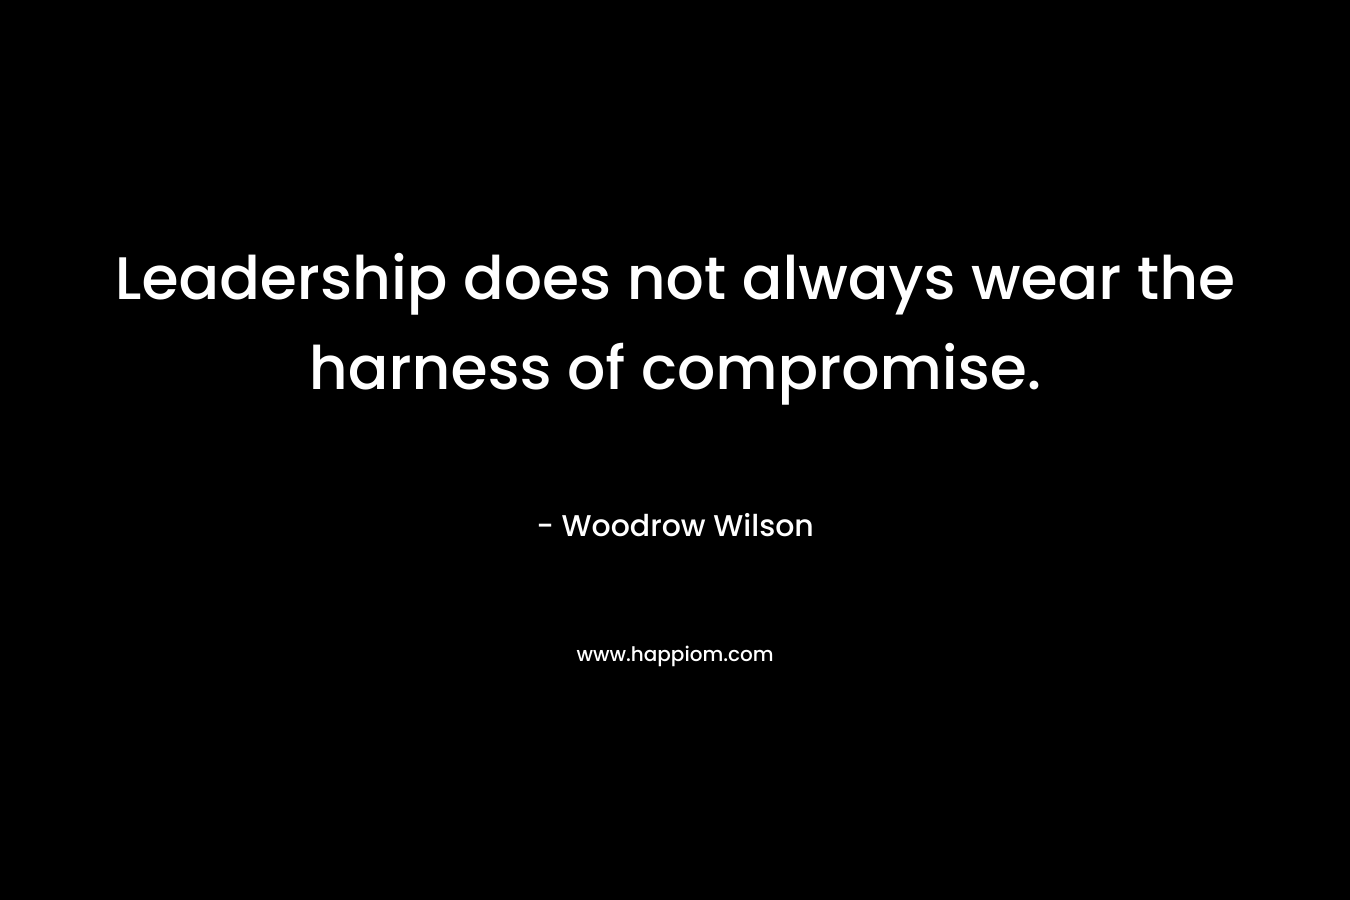 Leadership does not always wear the harness of compromise. – Woodrow Wilson